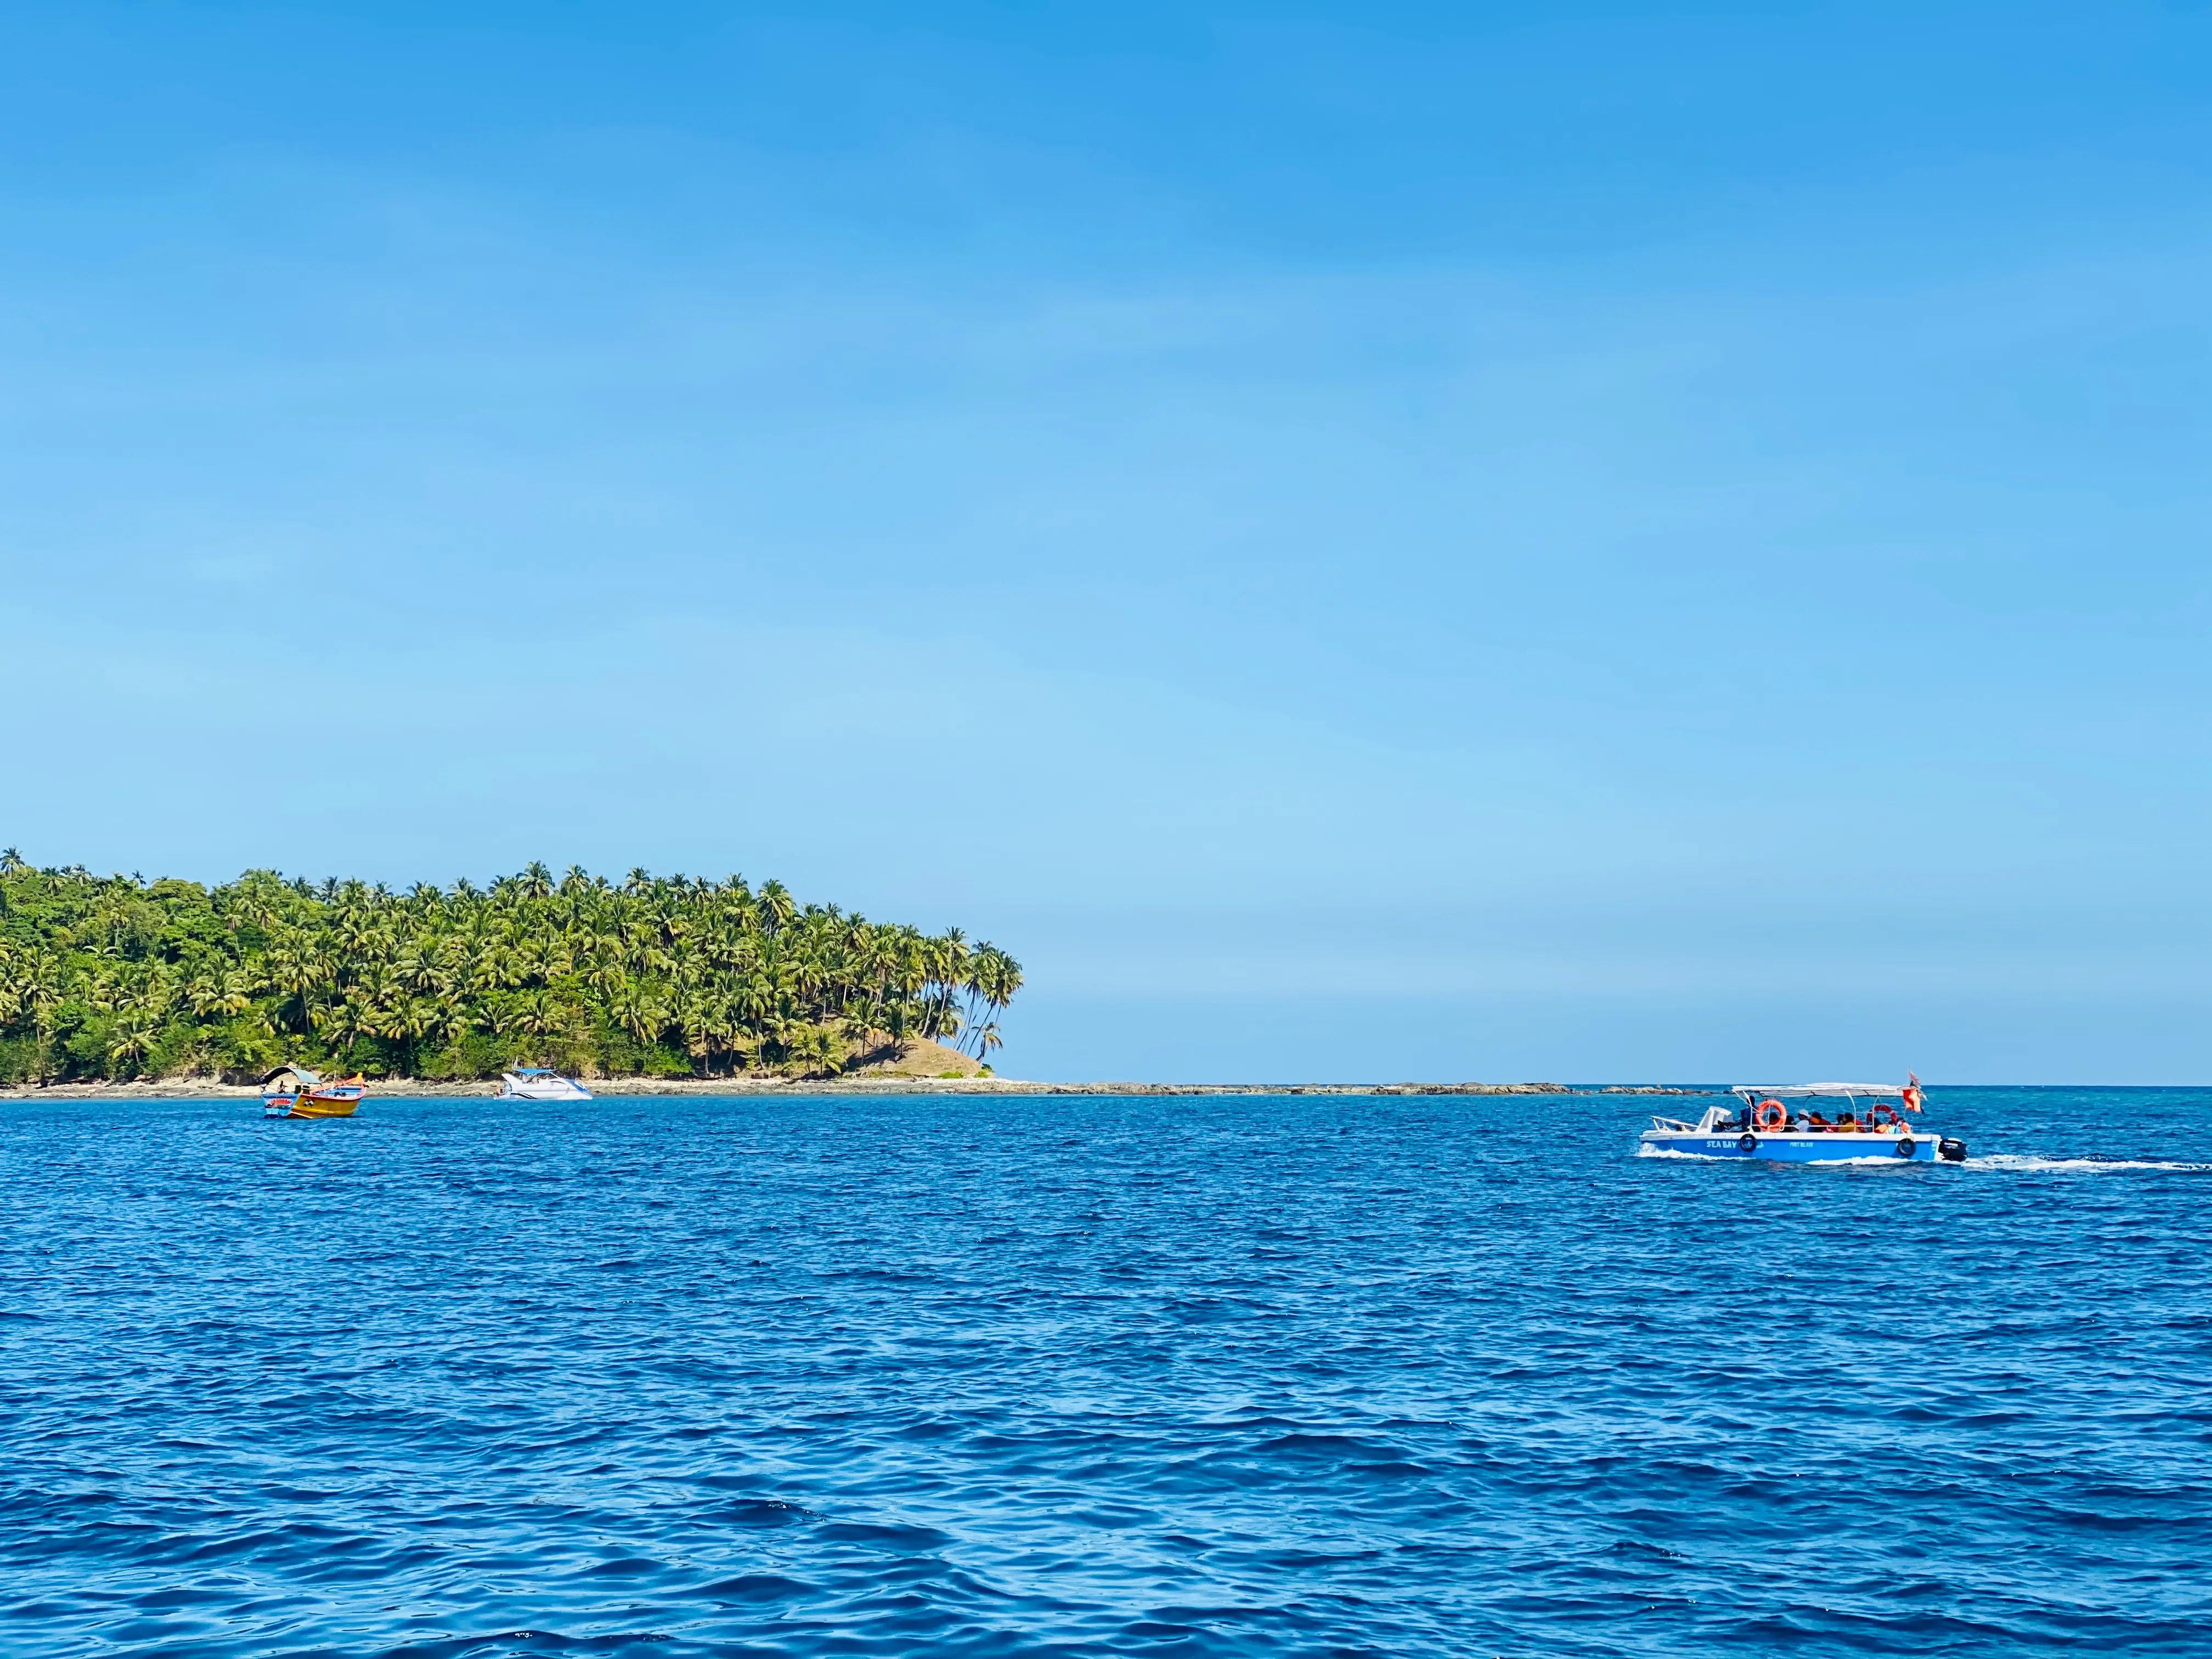  The Fabulous Oceans Port Blair  Tour by Smart Family Vacations